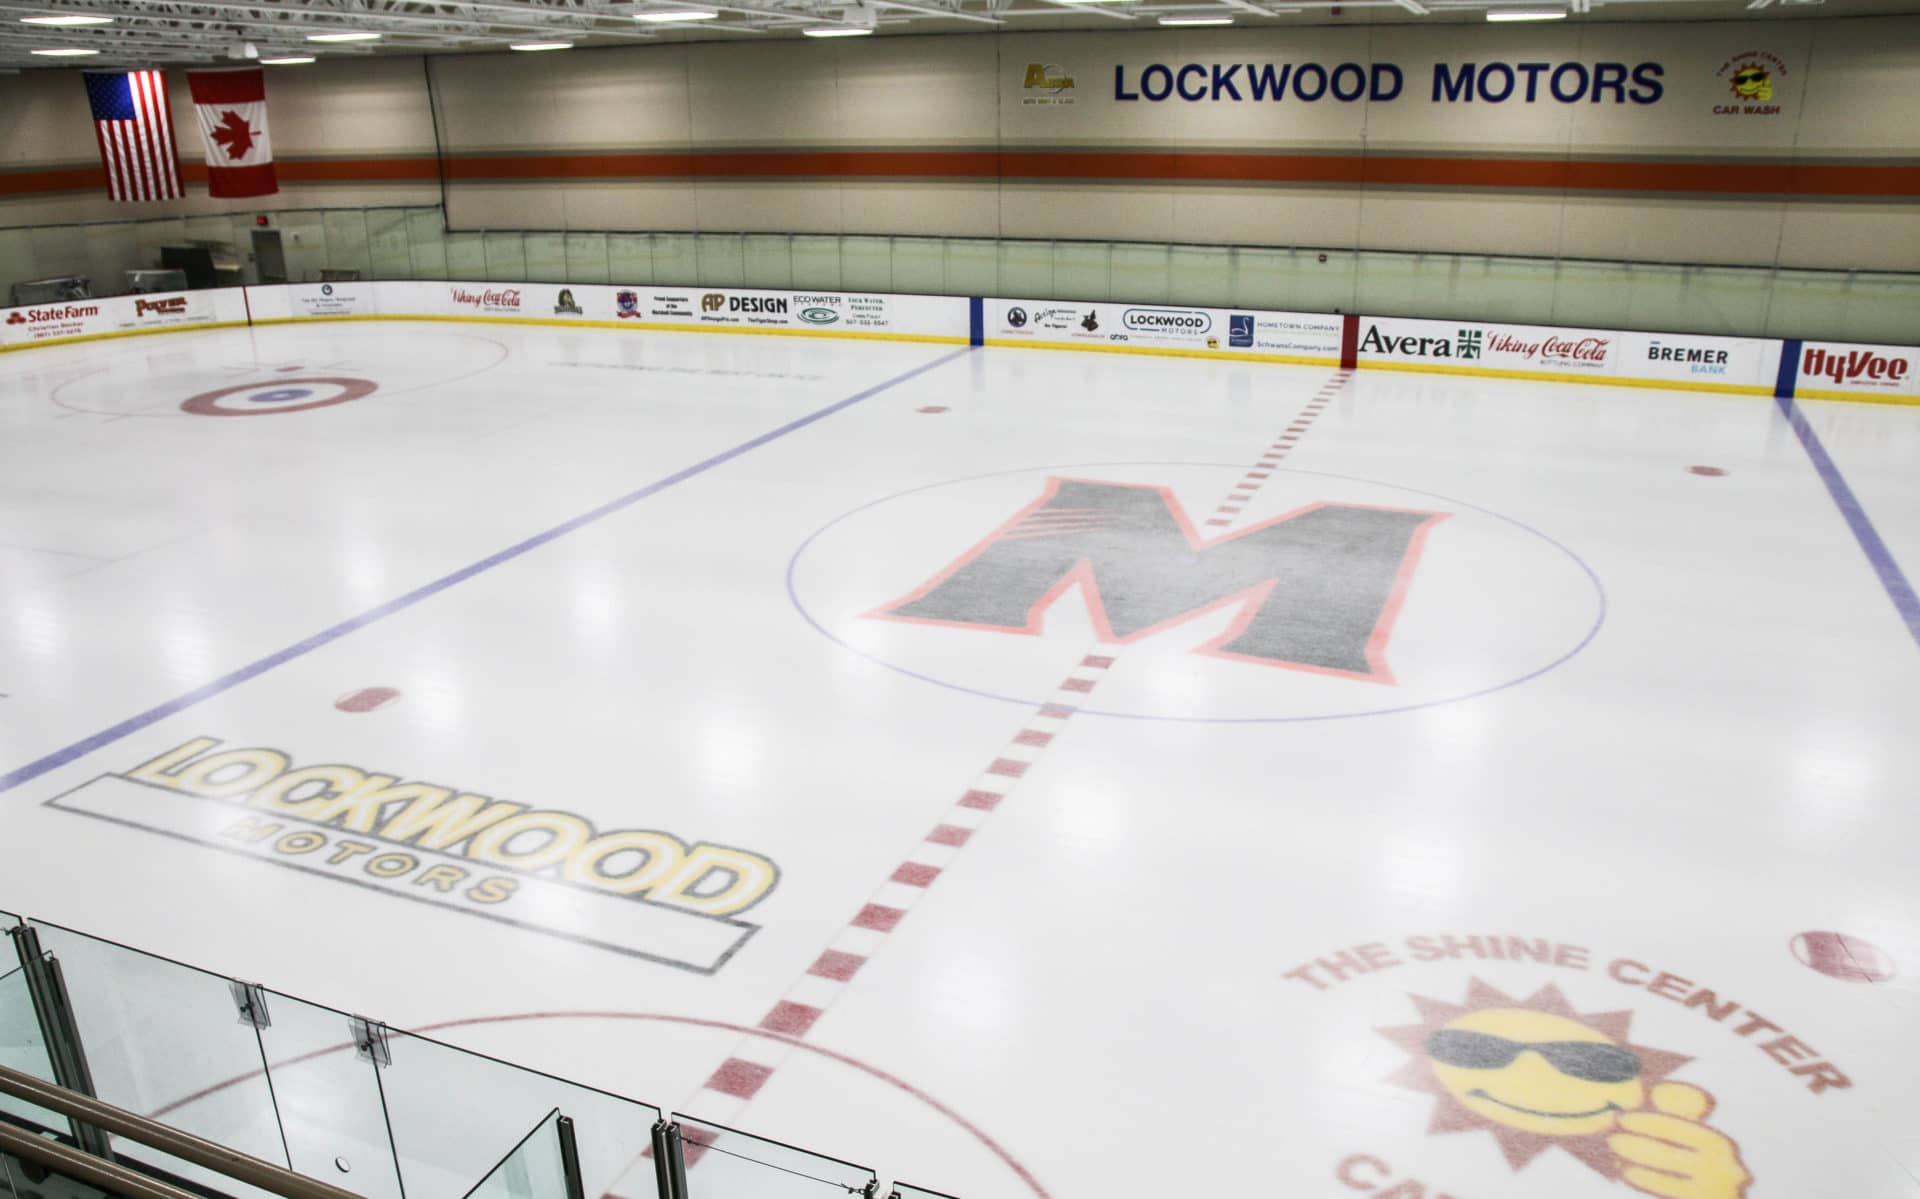 Red Baron Arena ice rink with logos